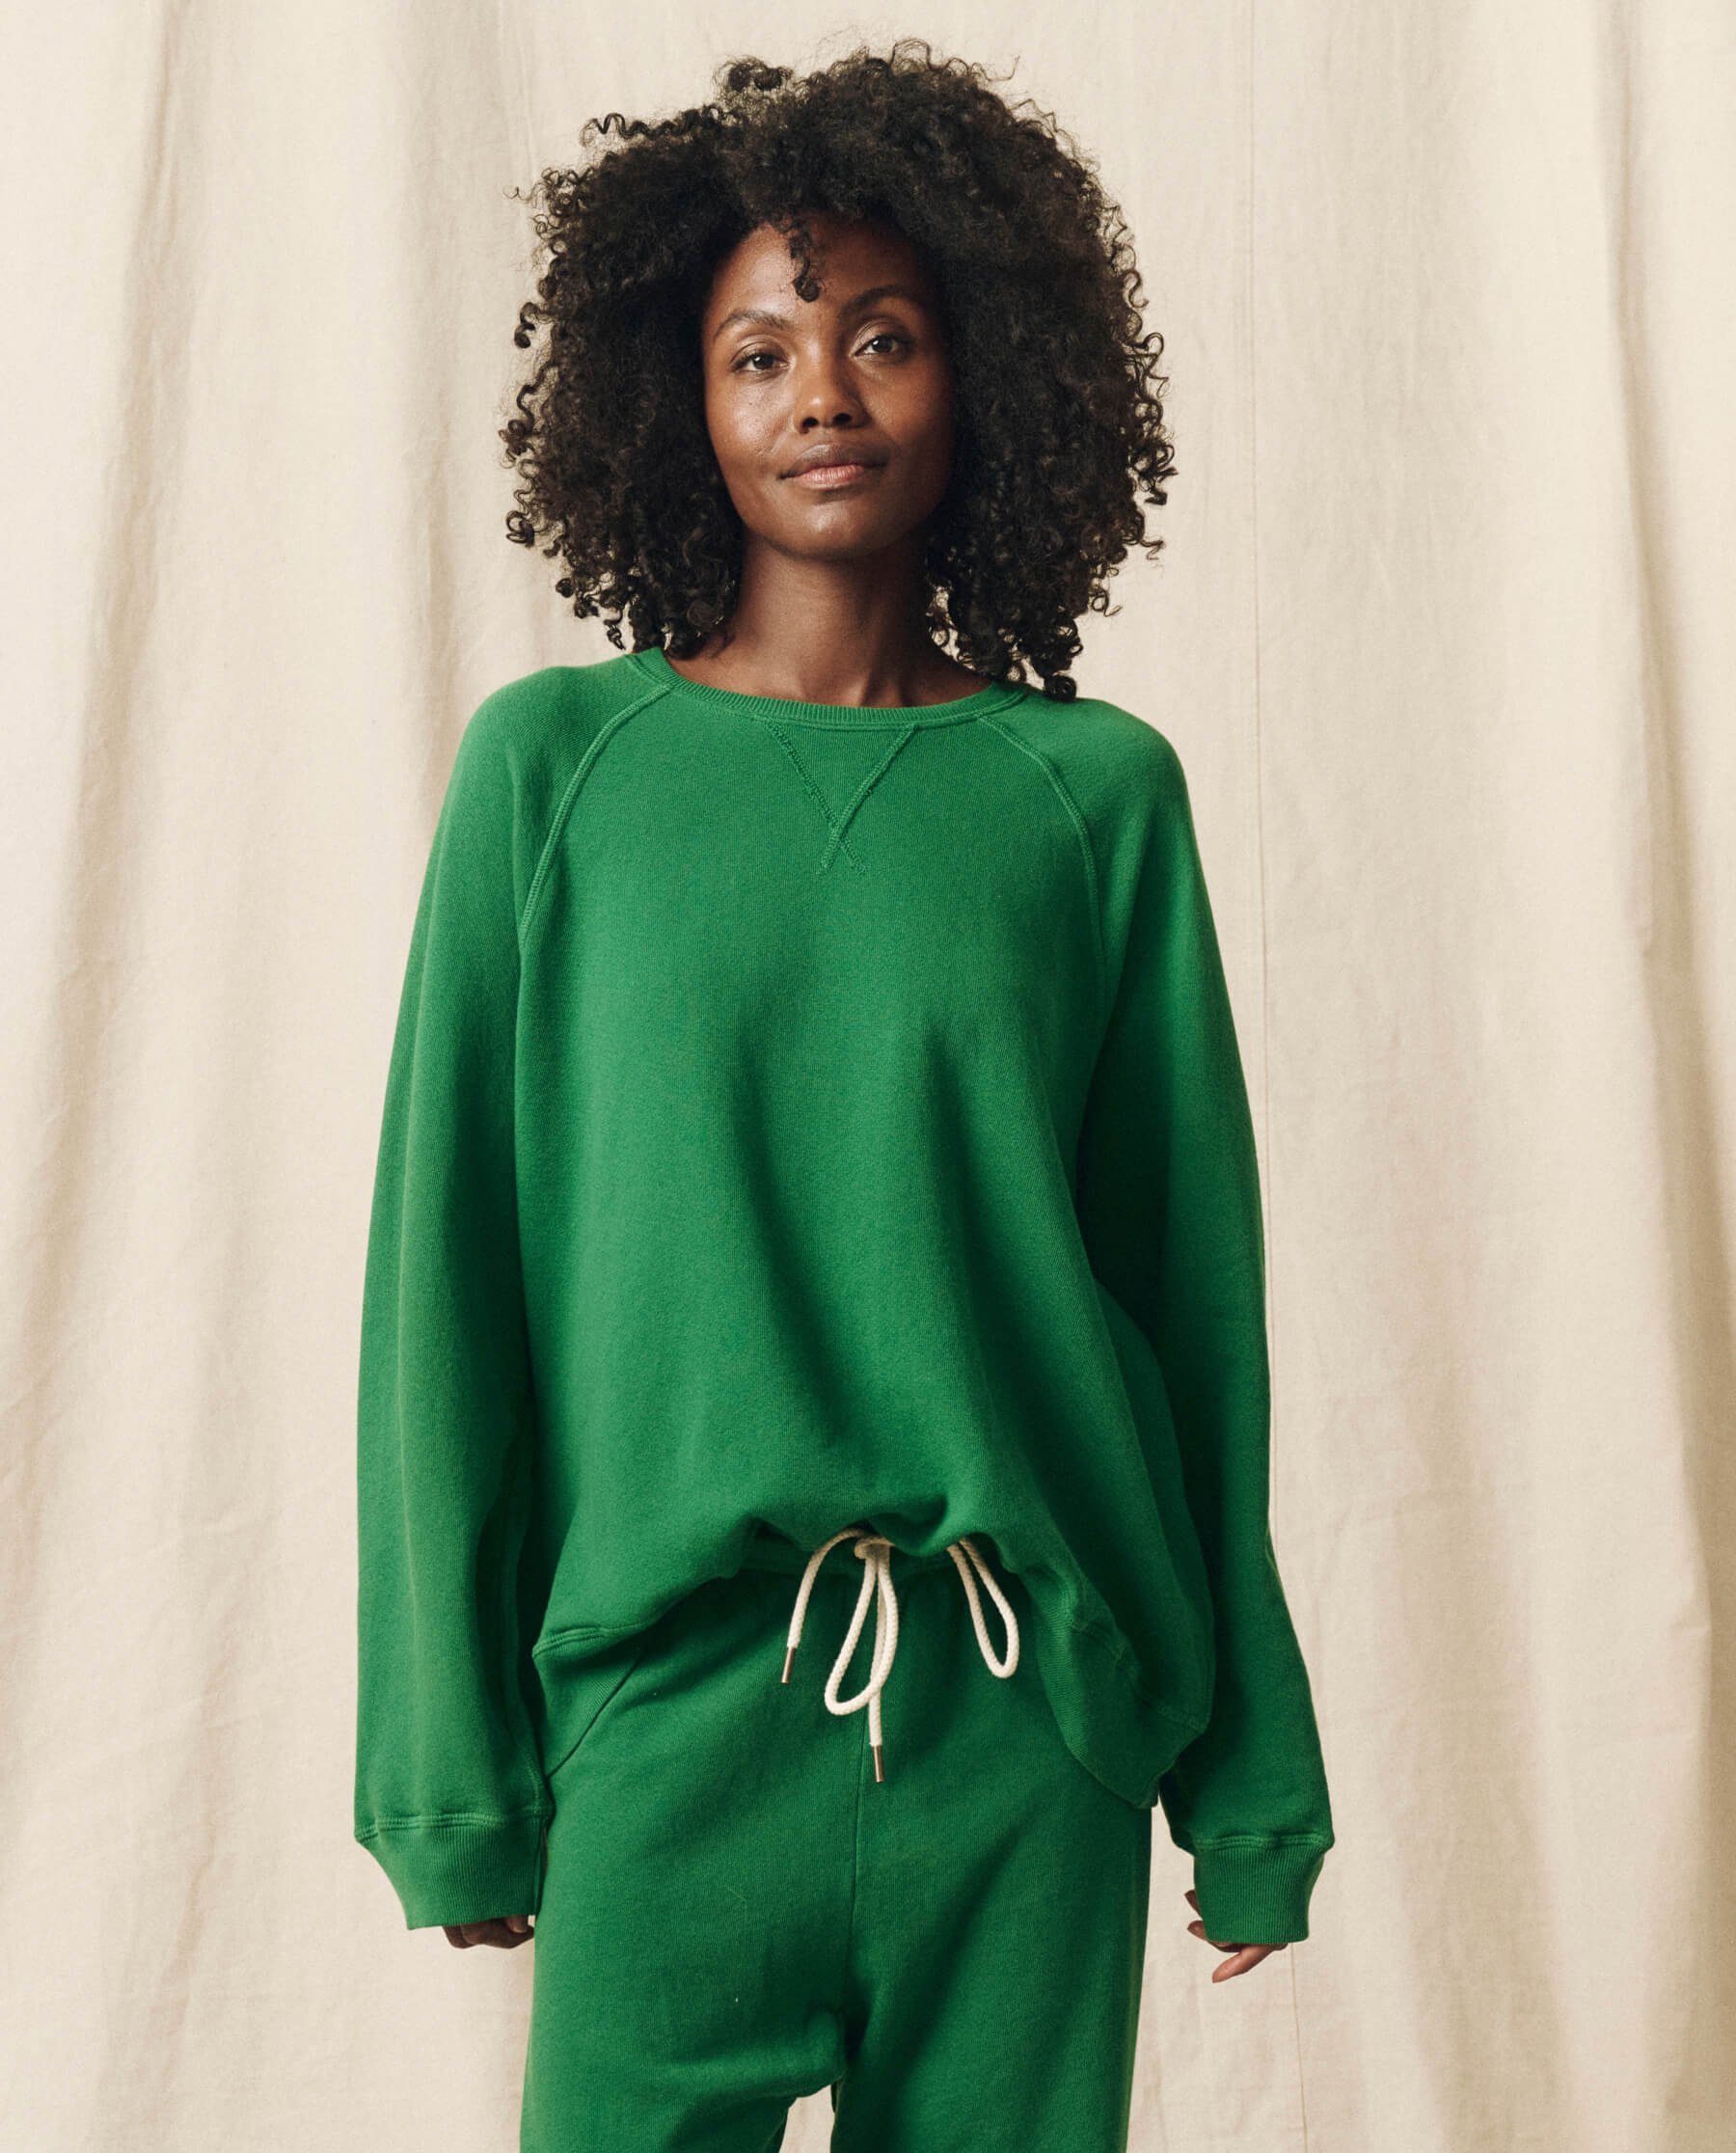 The Slouch Sweatshirt. Solid -- Holly Leaf